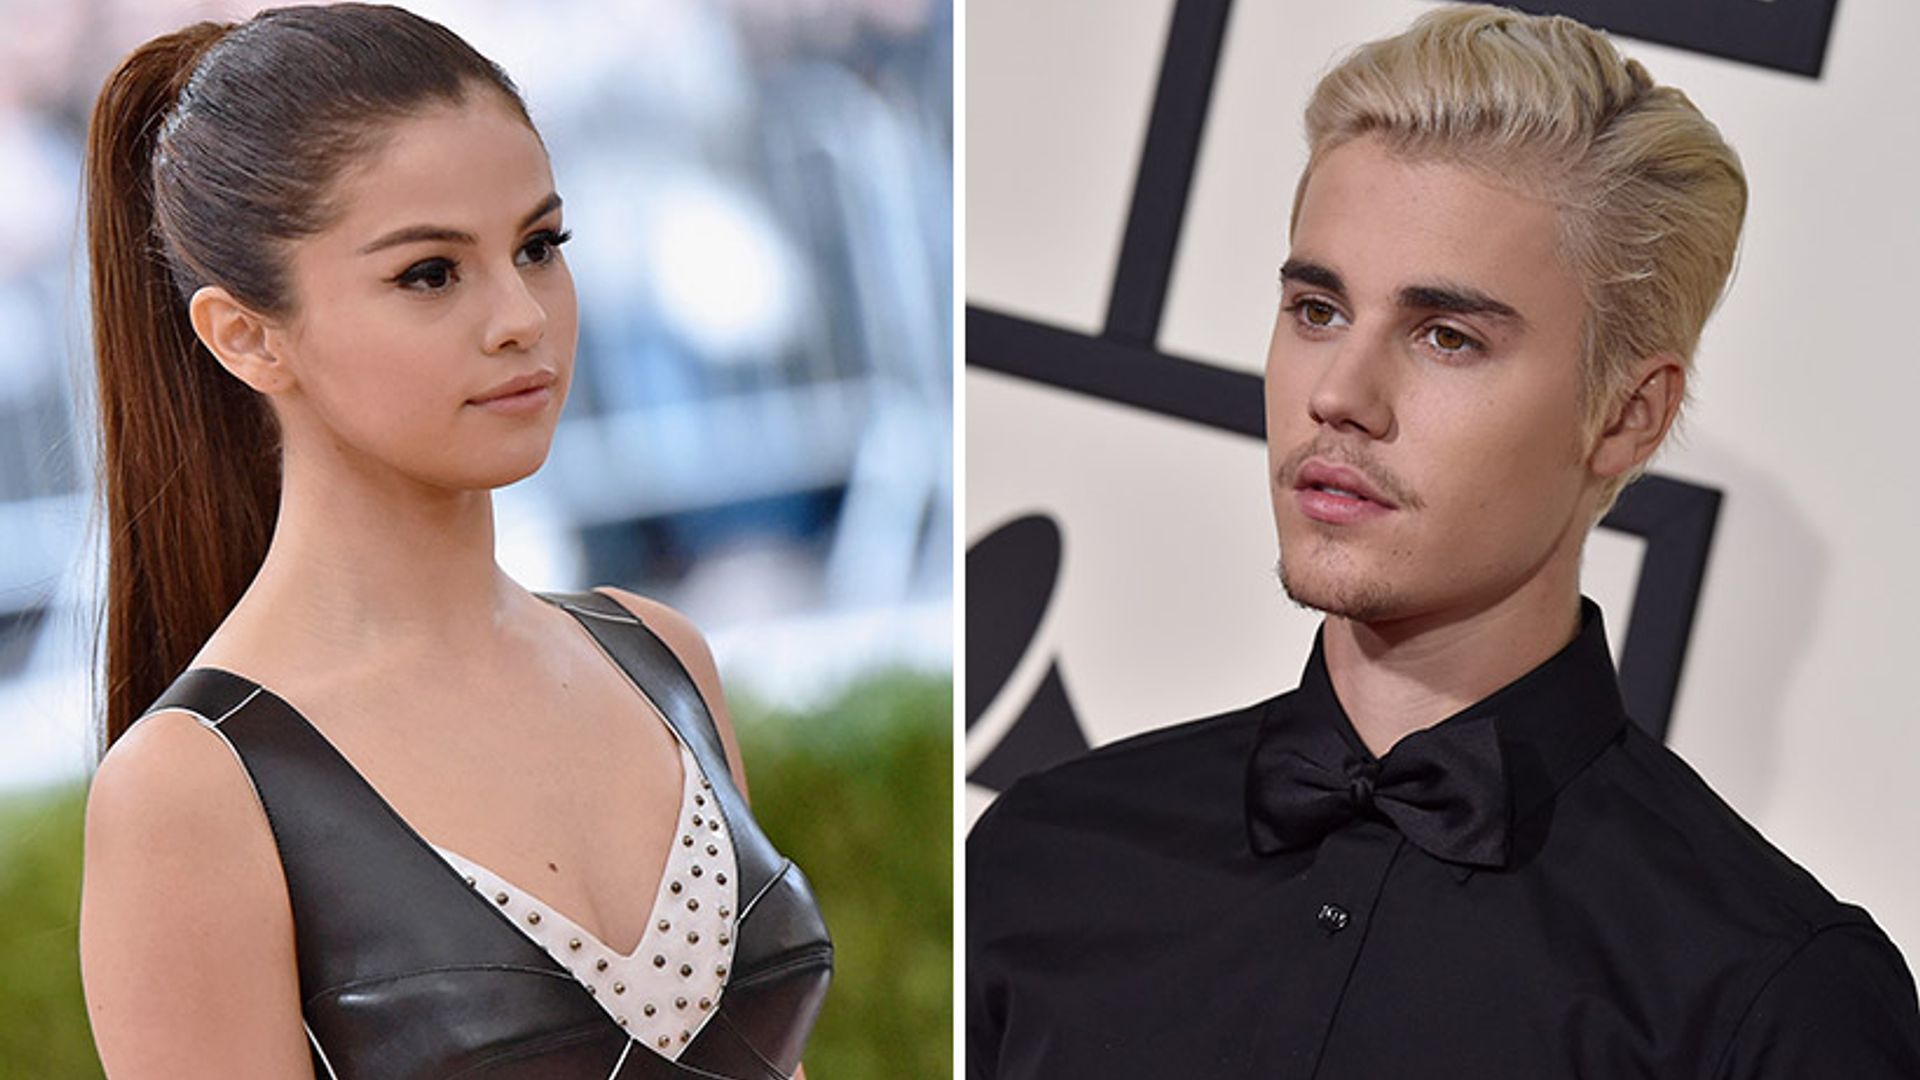 Selena Gomez and Justin Bieber clash on Instagram: 'No wonder the fans are mad!'